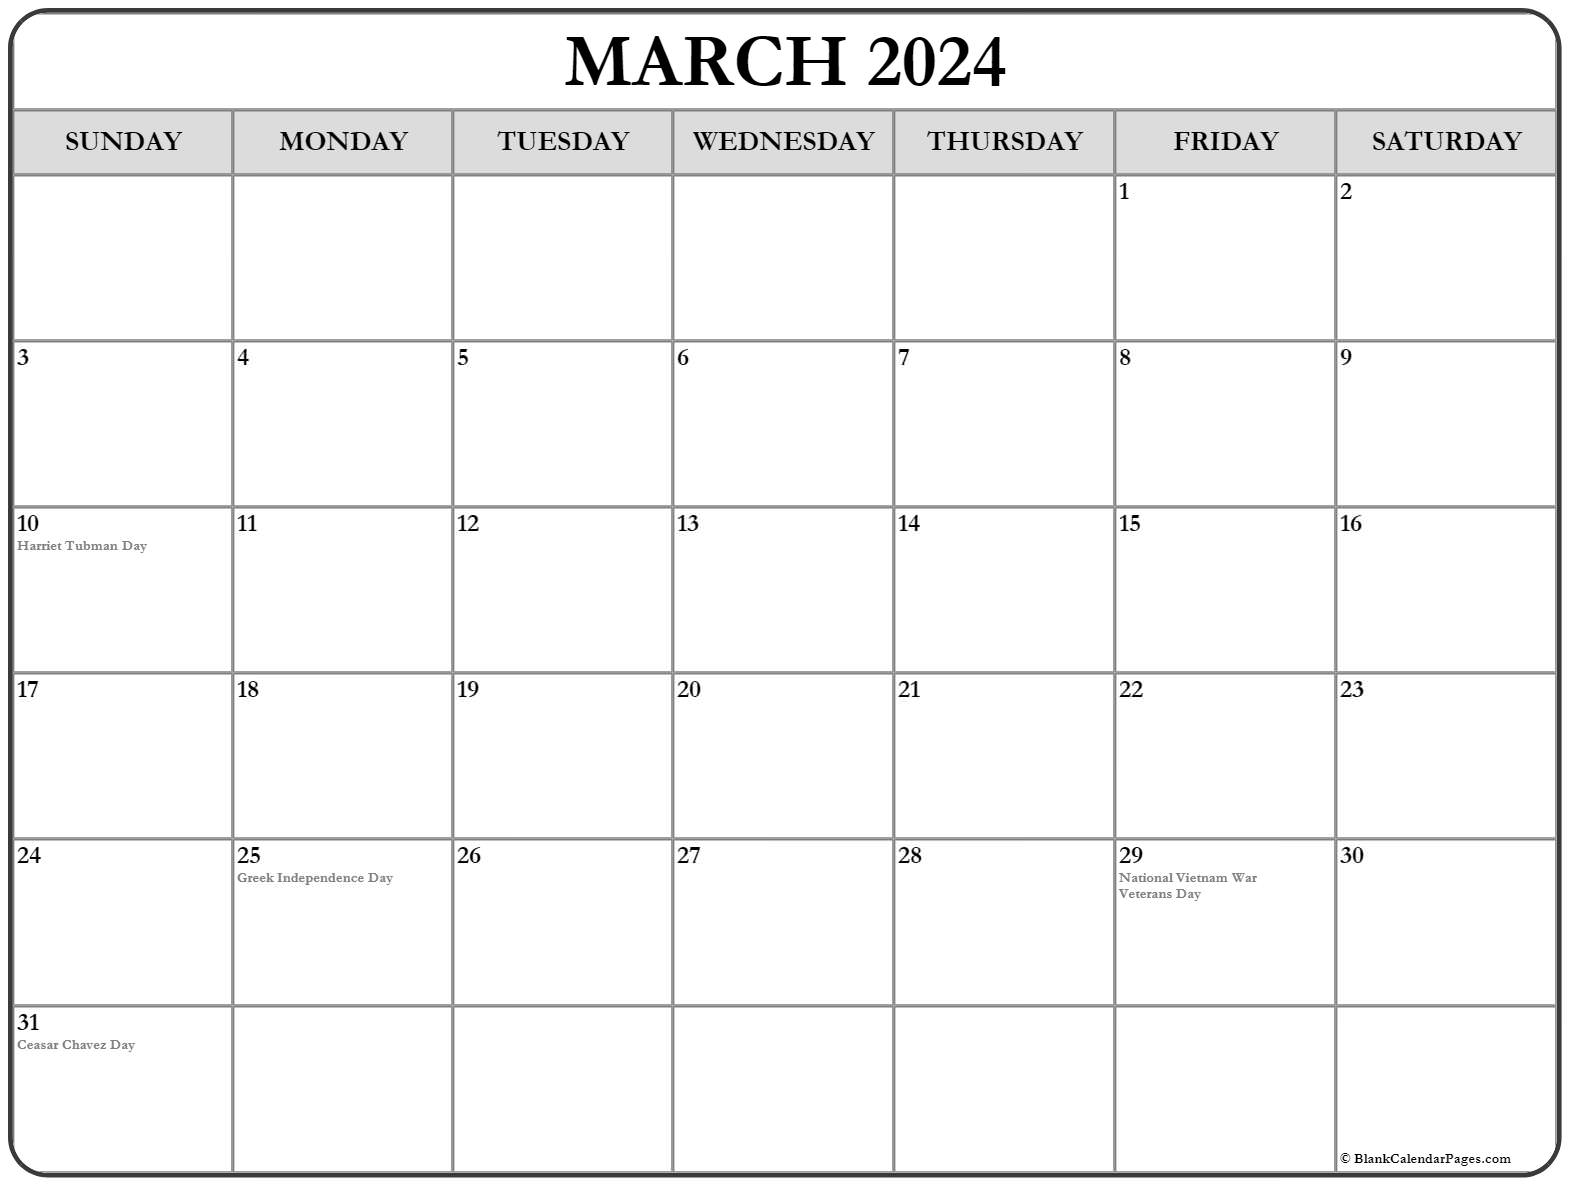 2022 march holiday Holidays and